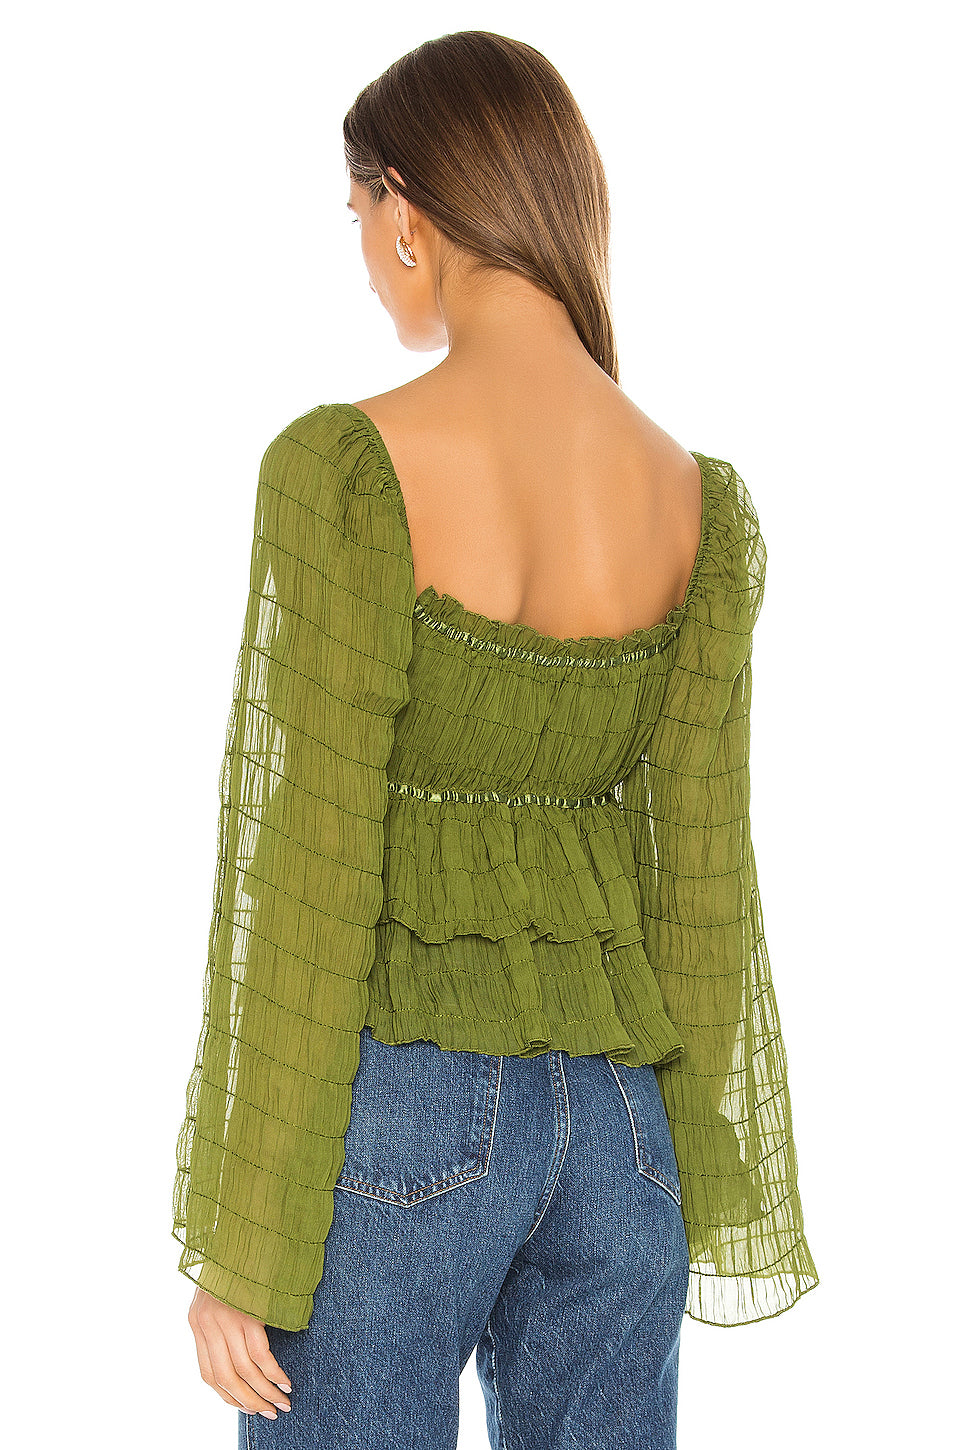 Lucy Top in MOSS GREEN